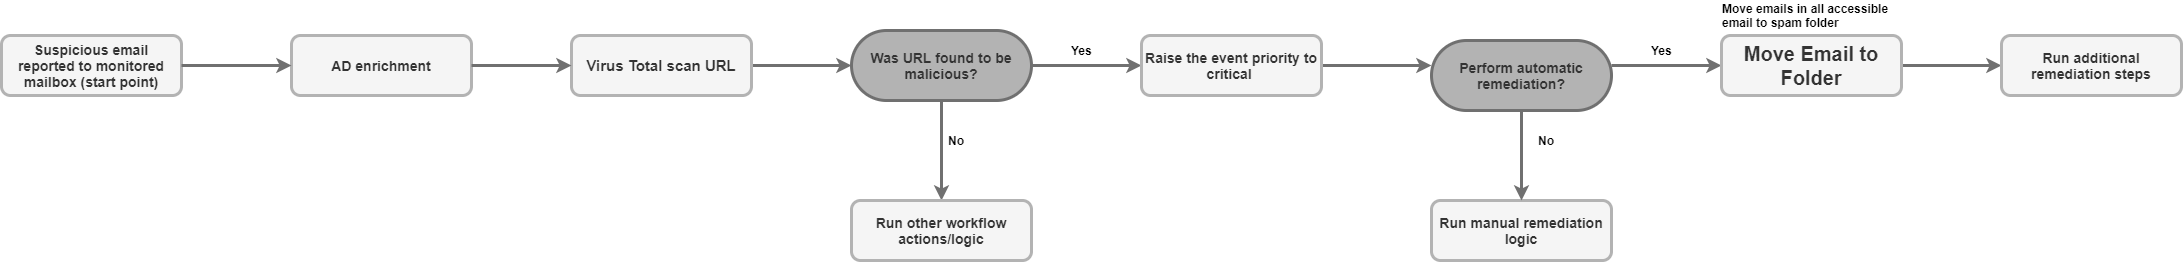 Use case
workflow